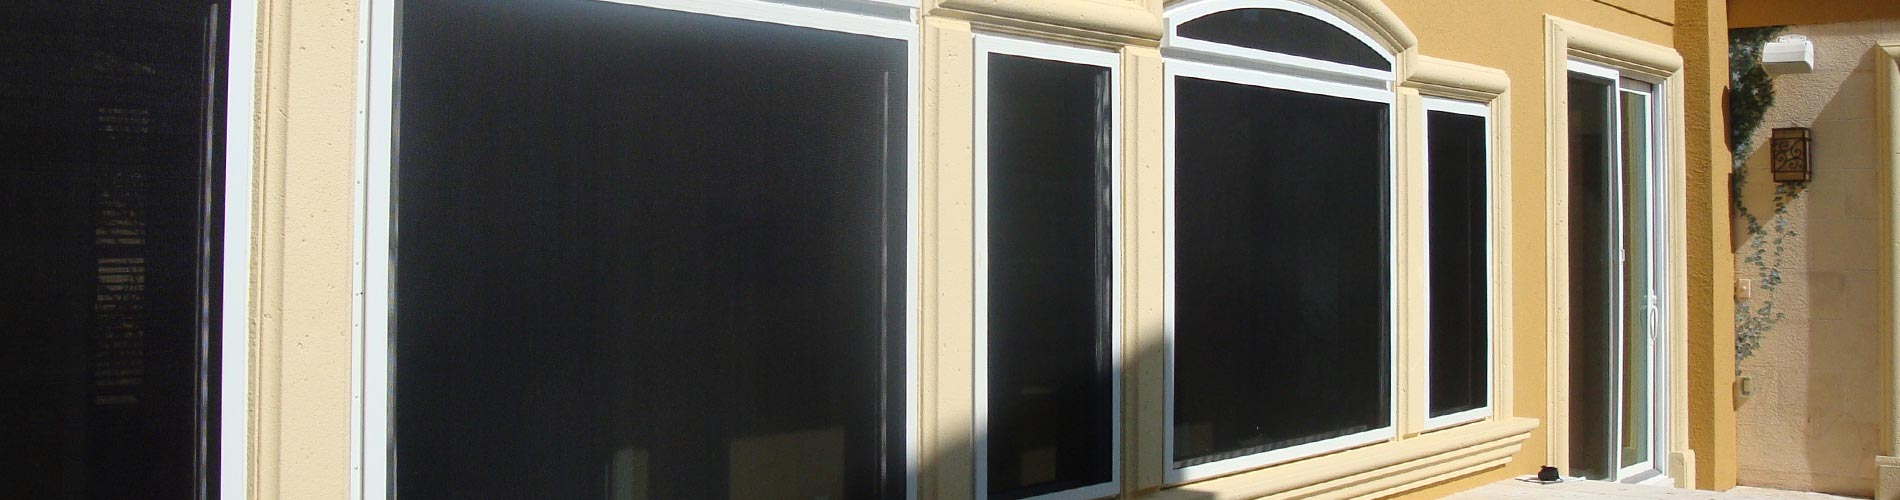 Solar Safety Window Film: Combine Security with Energy Savings